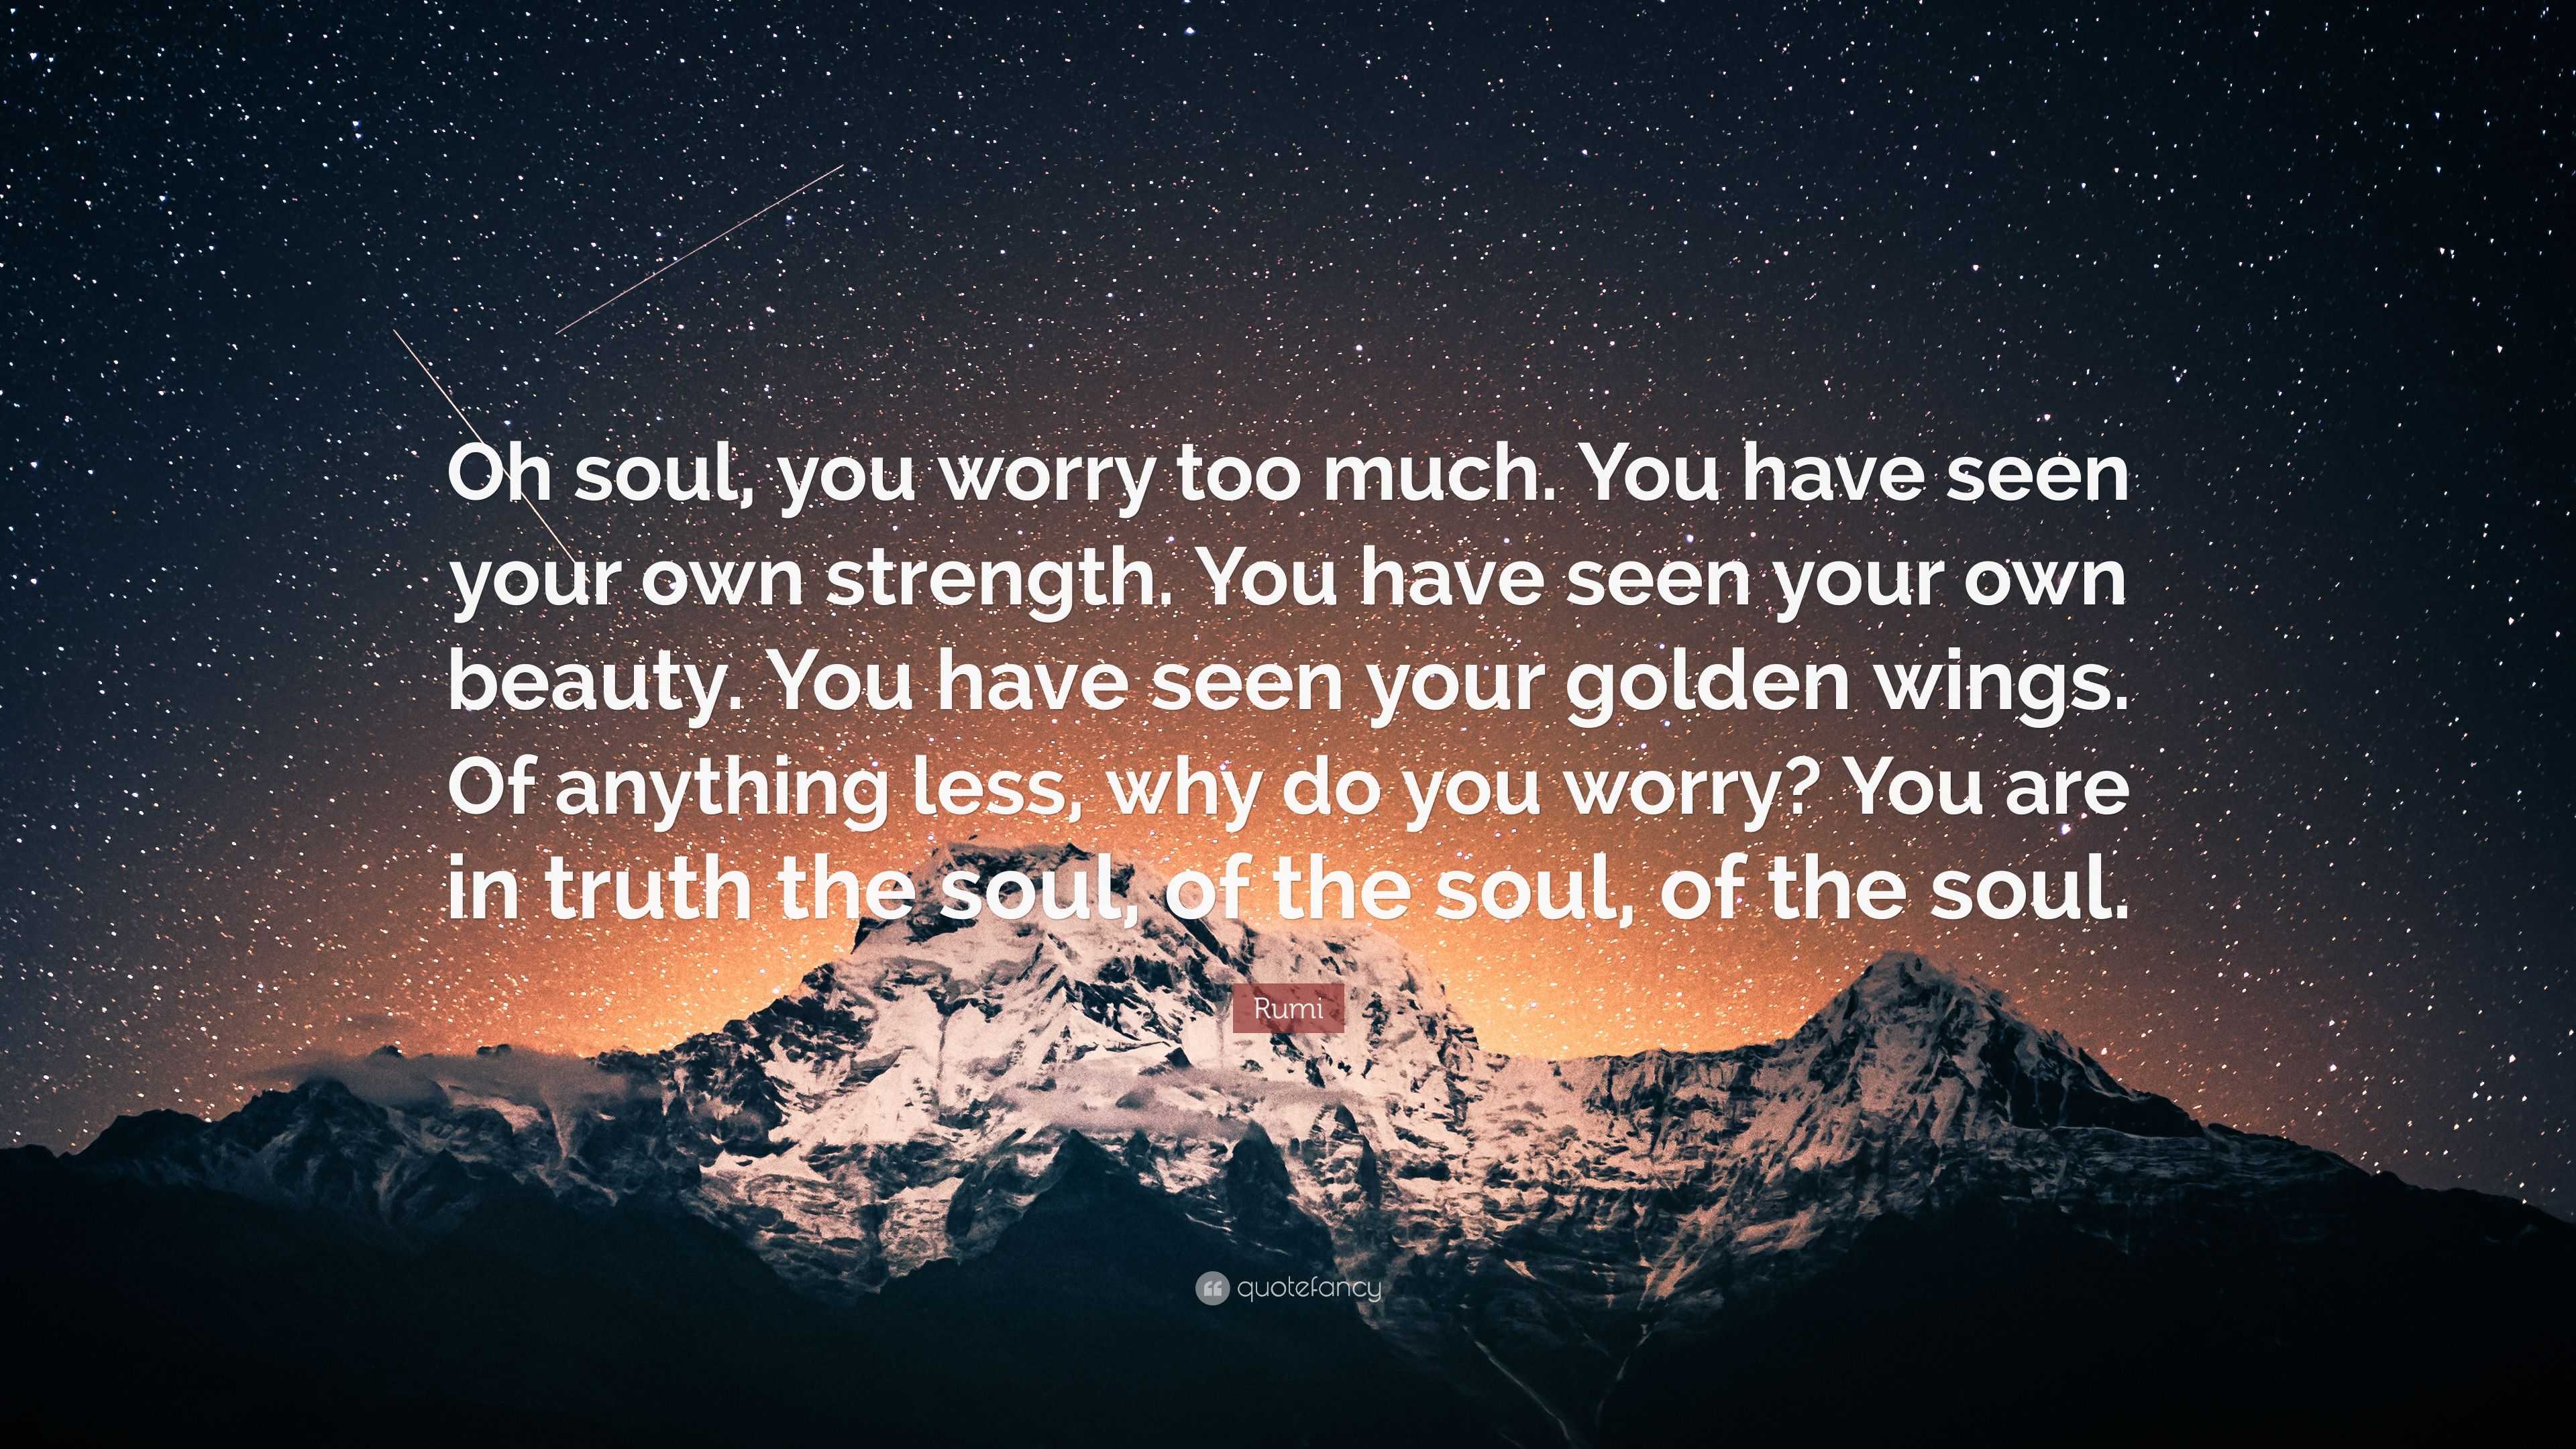 Rumi Quote: “Oh soul, you worry too much. You have seen your own